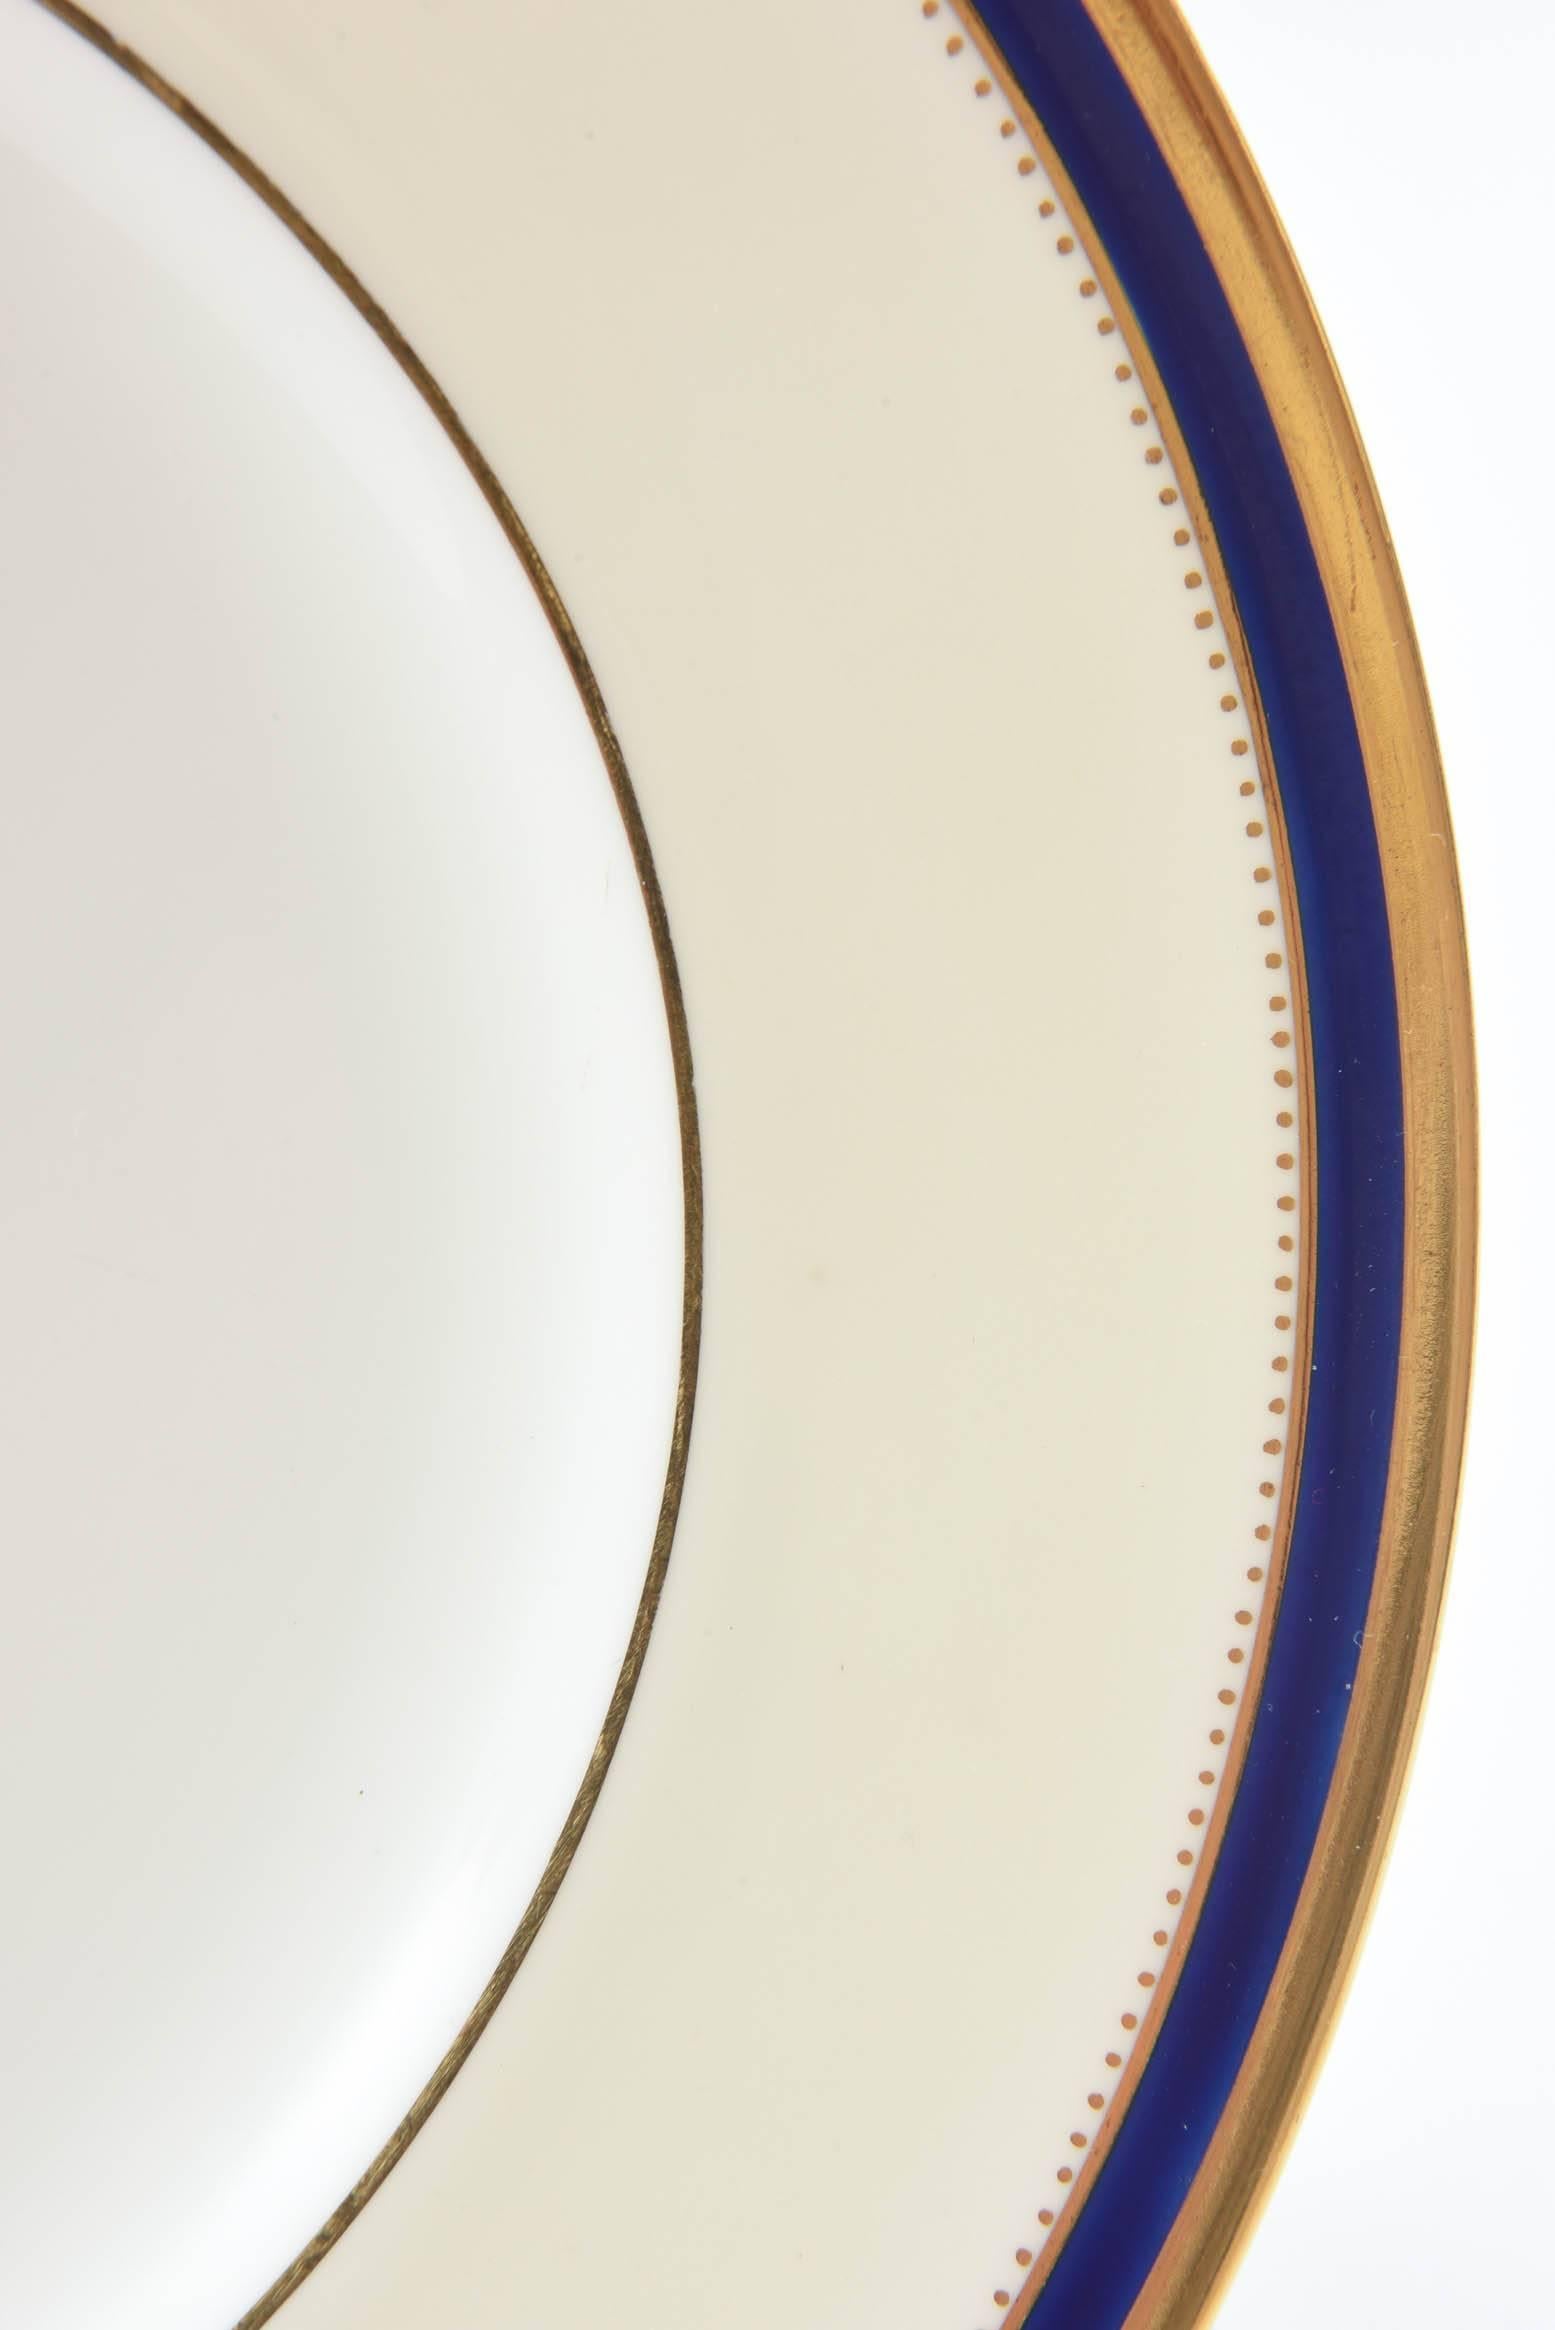 Hand-Crafted Six Minton England Cobalt Blue and Gold Salad and or Dessert Plates, Antique